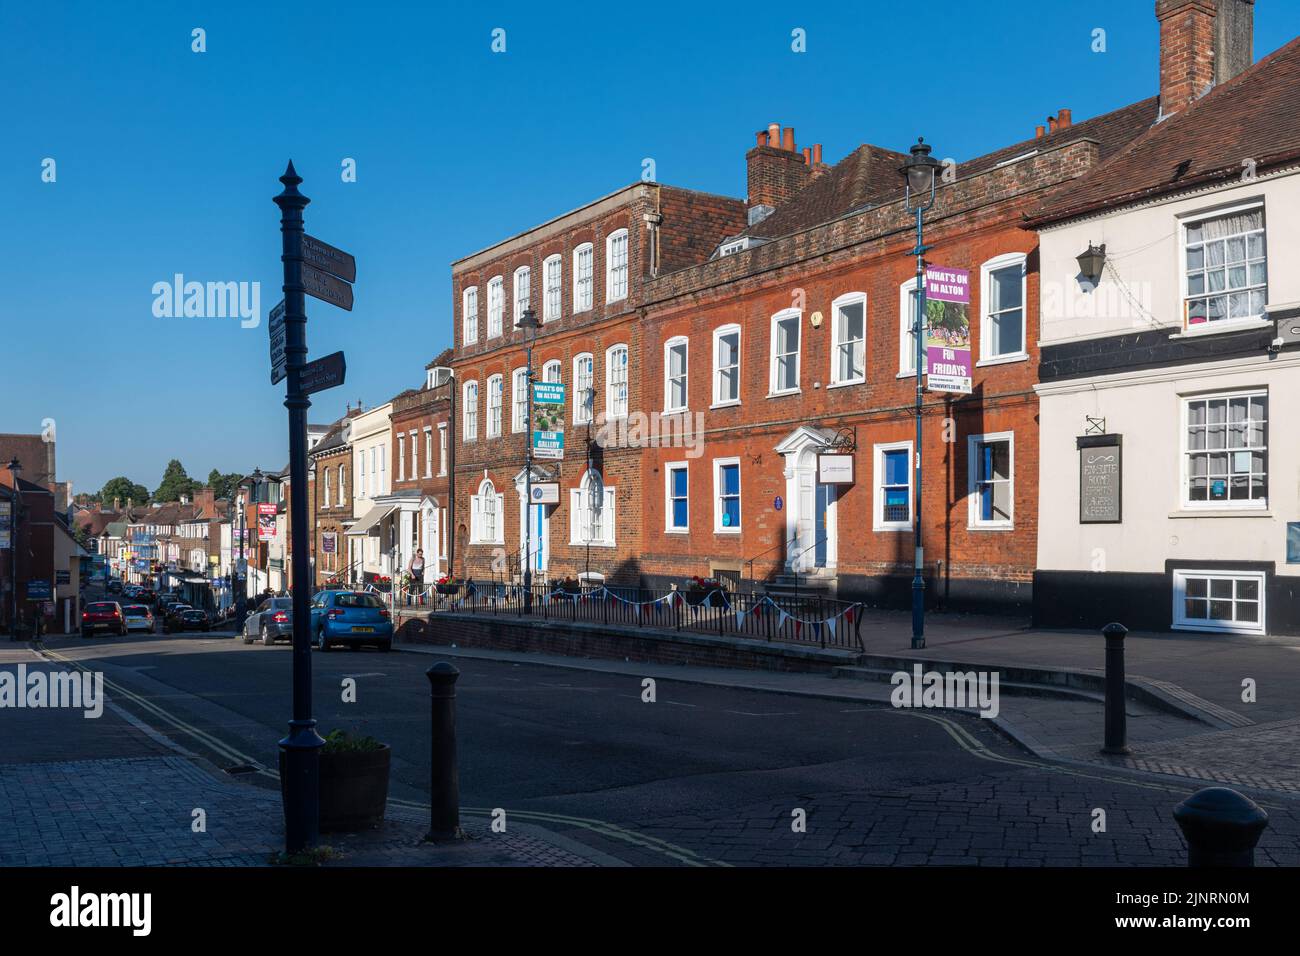 View of Alton High Street in the town centre, Hampshire, England, UK Stock Photo